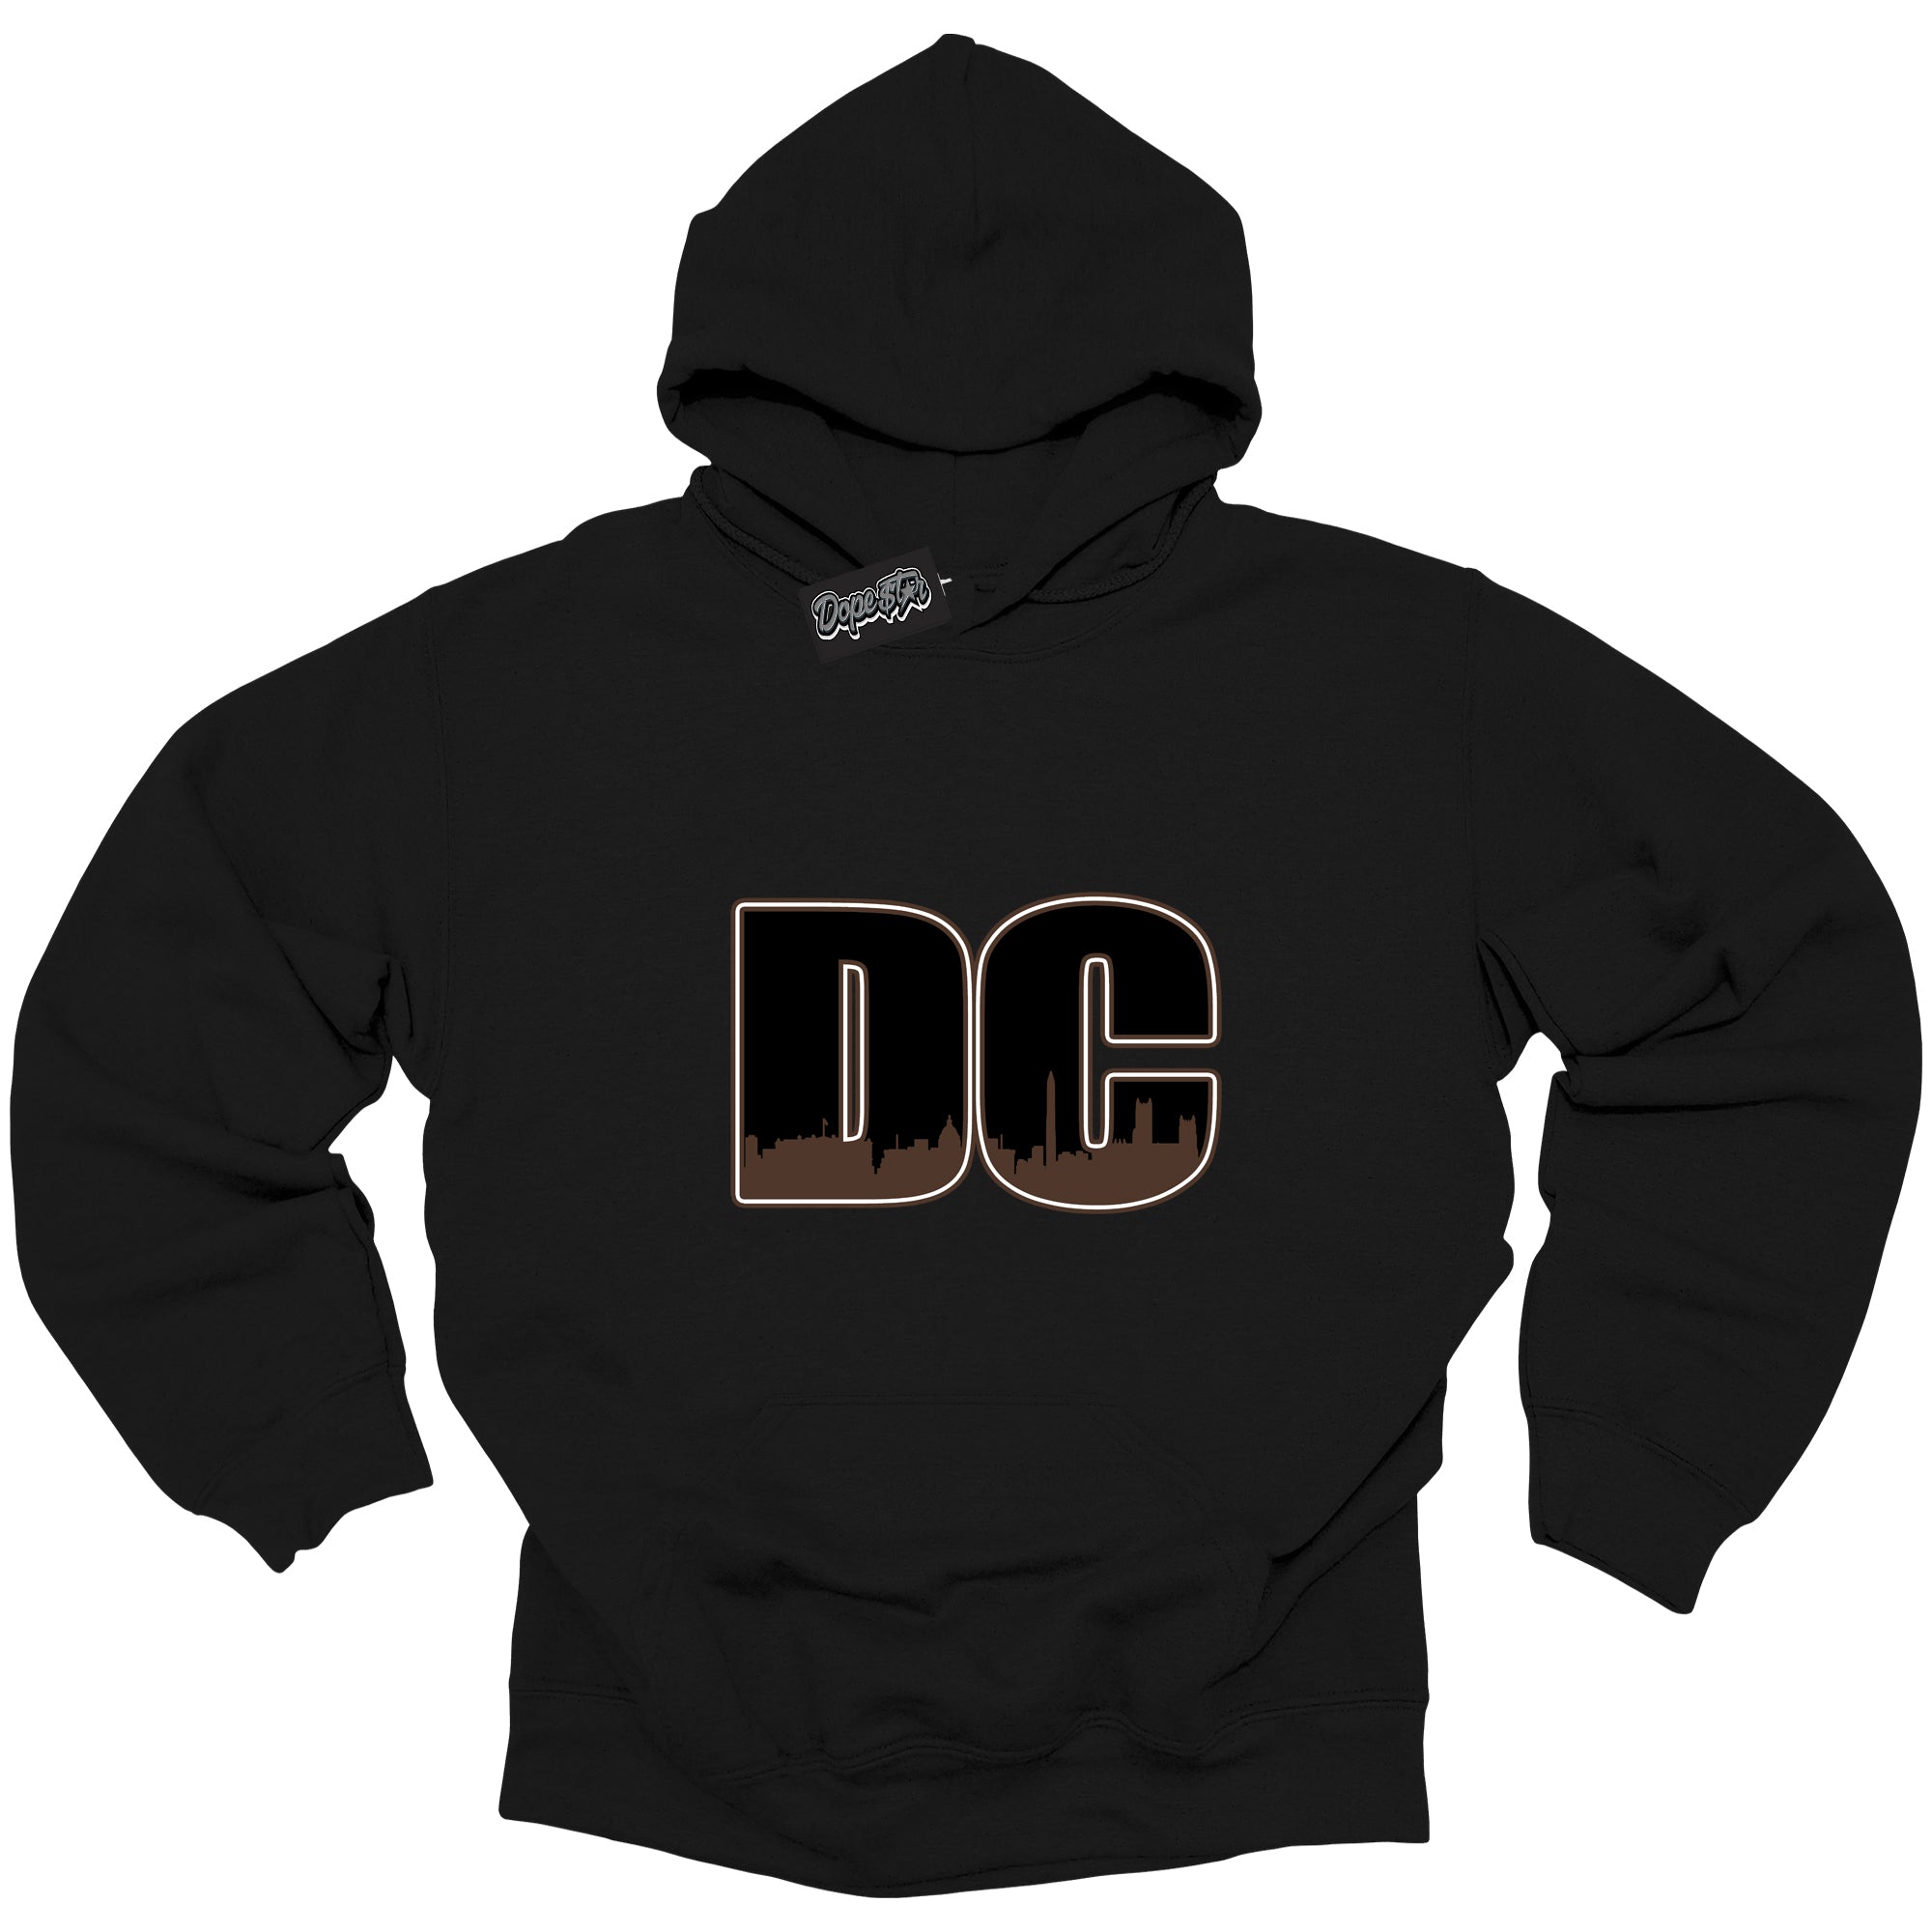 Cool Black Graphic DopeStar Hoodie with “ DC “ print, that perfectly matches Palomino 1s sneakers